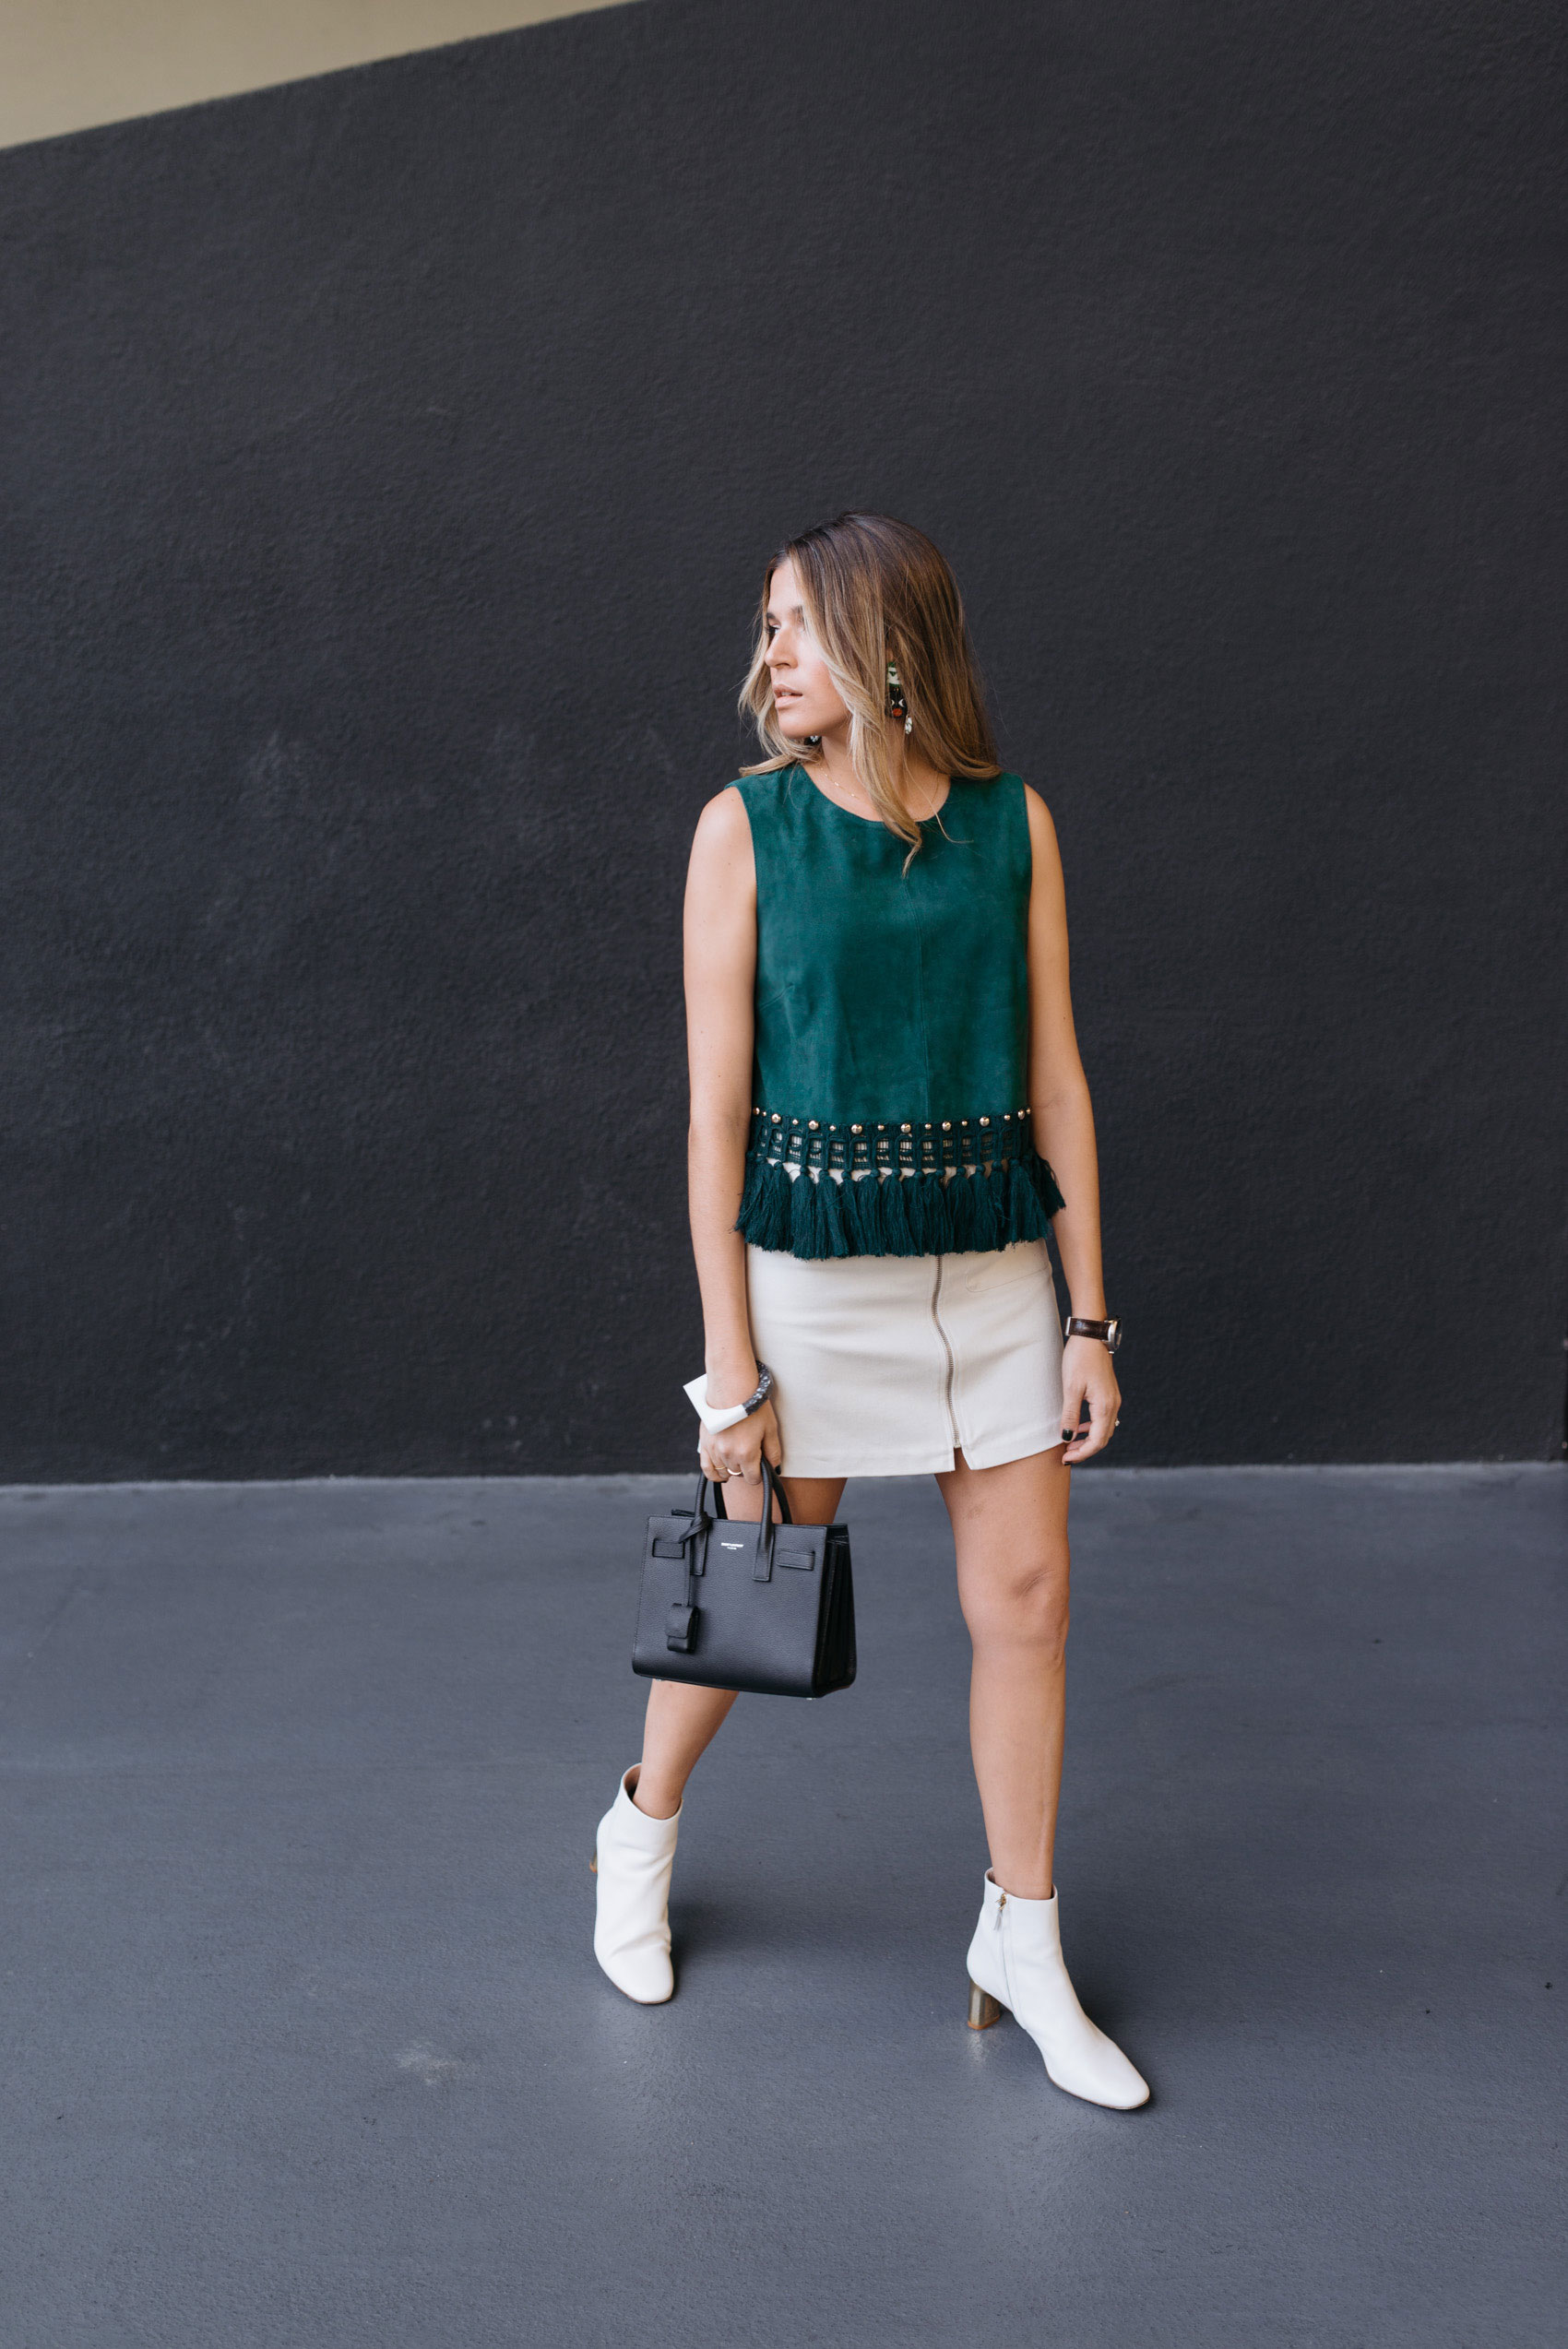 Blogger Maristella in Los Angeles at The Line Hotel, wearing a green suede top and white ankle boots from Uterqüe, skirt from Zara, Sac De Jour from Saint Laurent